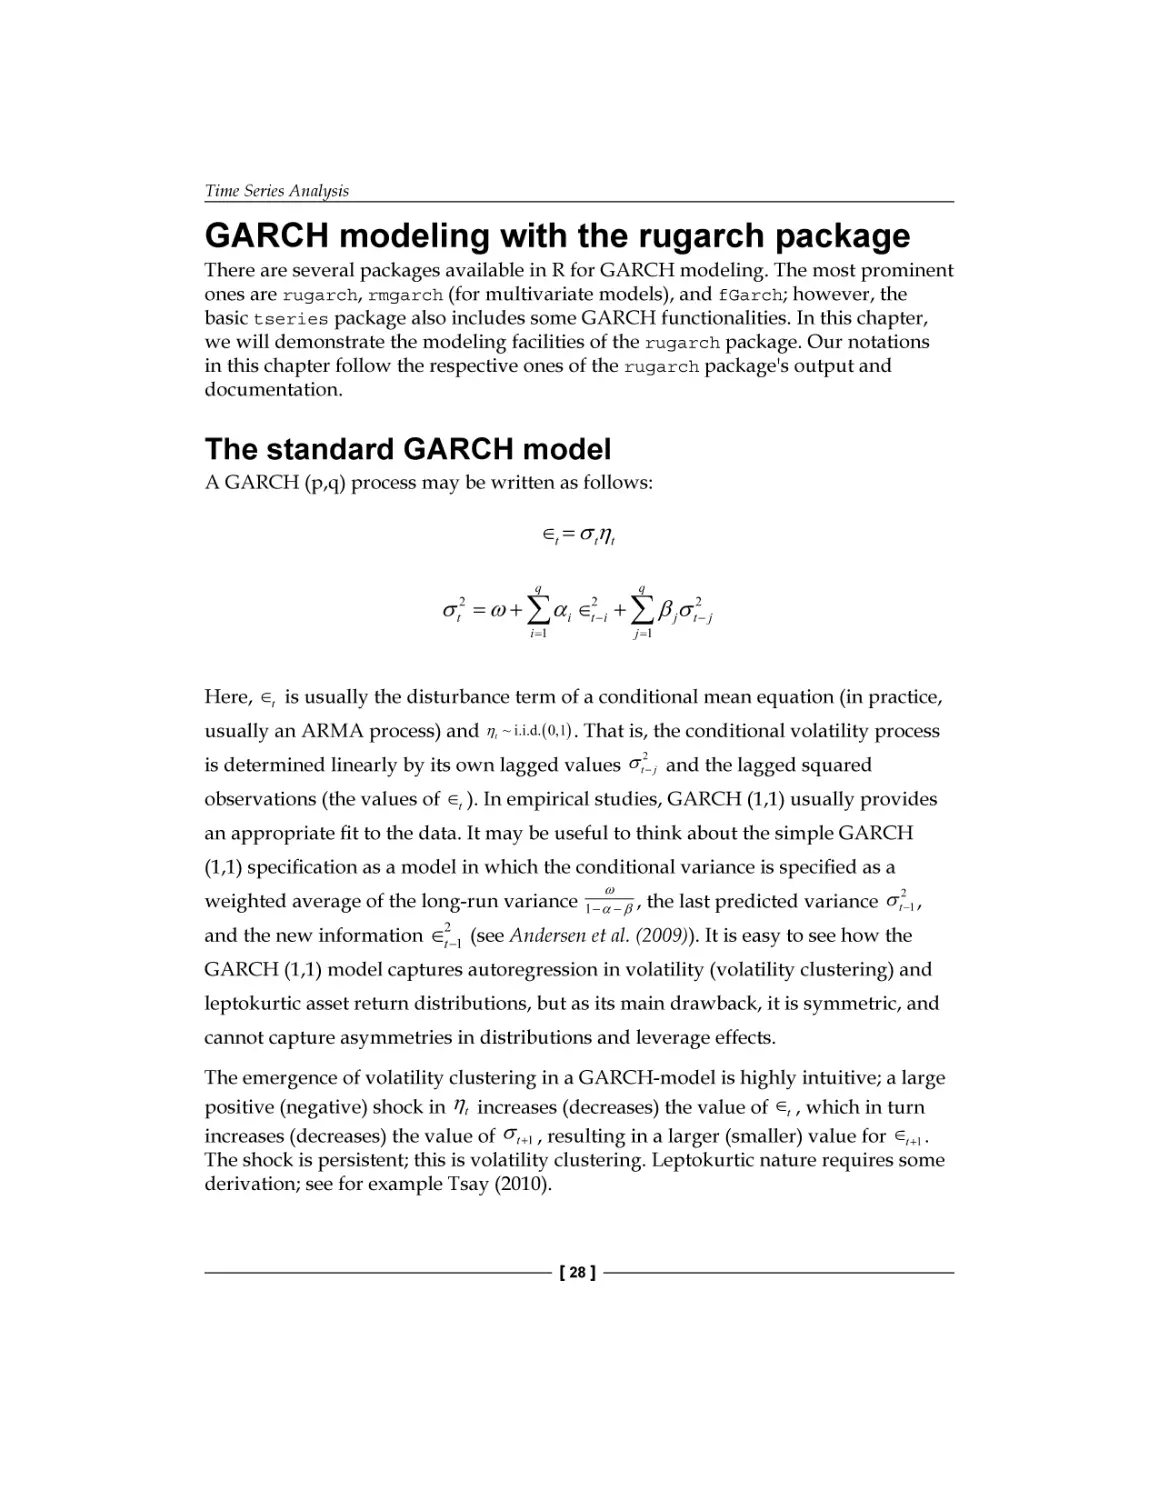 GARCH modeling with the rugarch package
The standard GARCH model